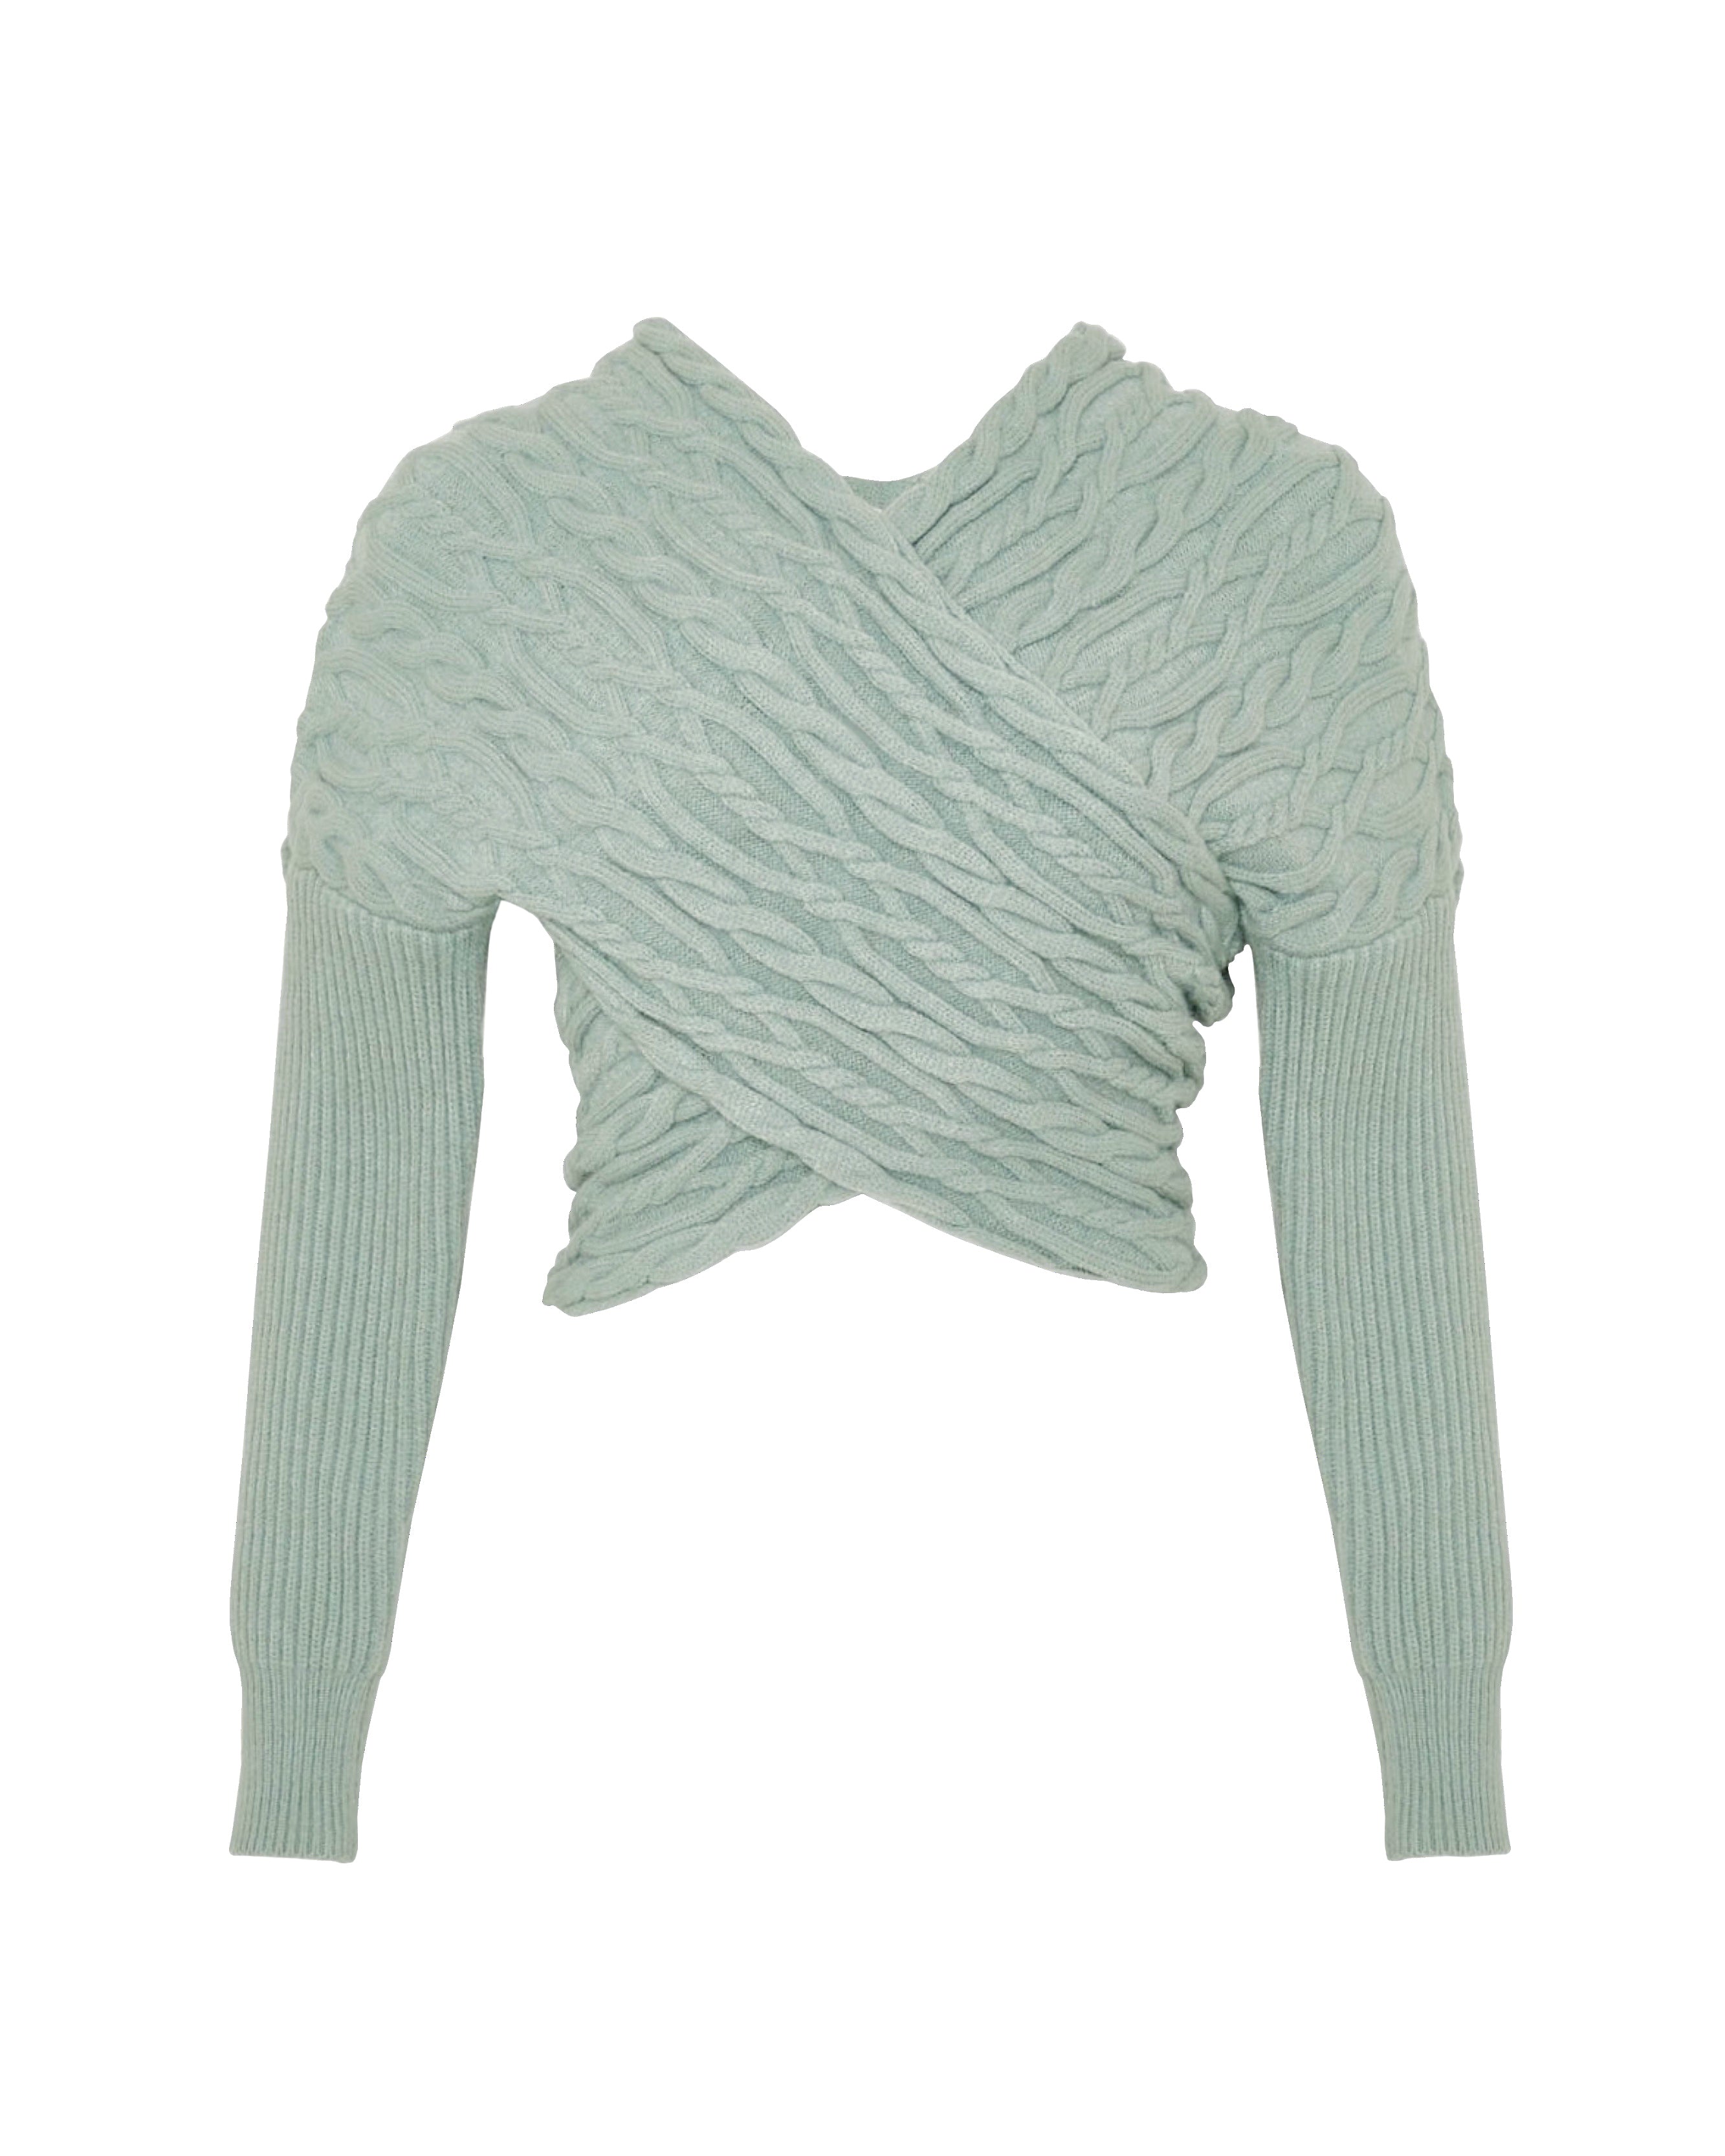 Daleyza Sage Cable Knit Top